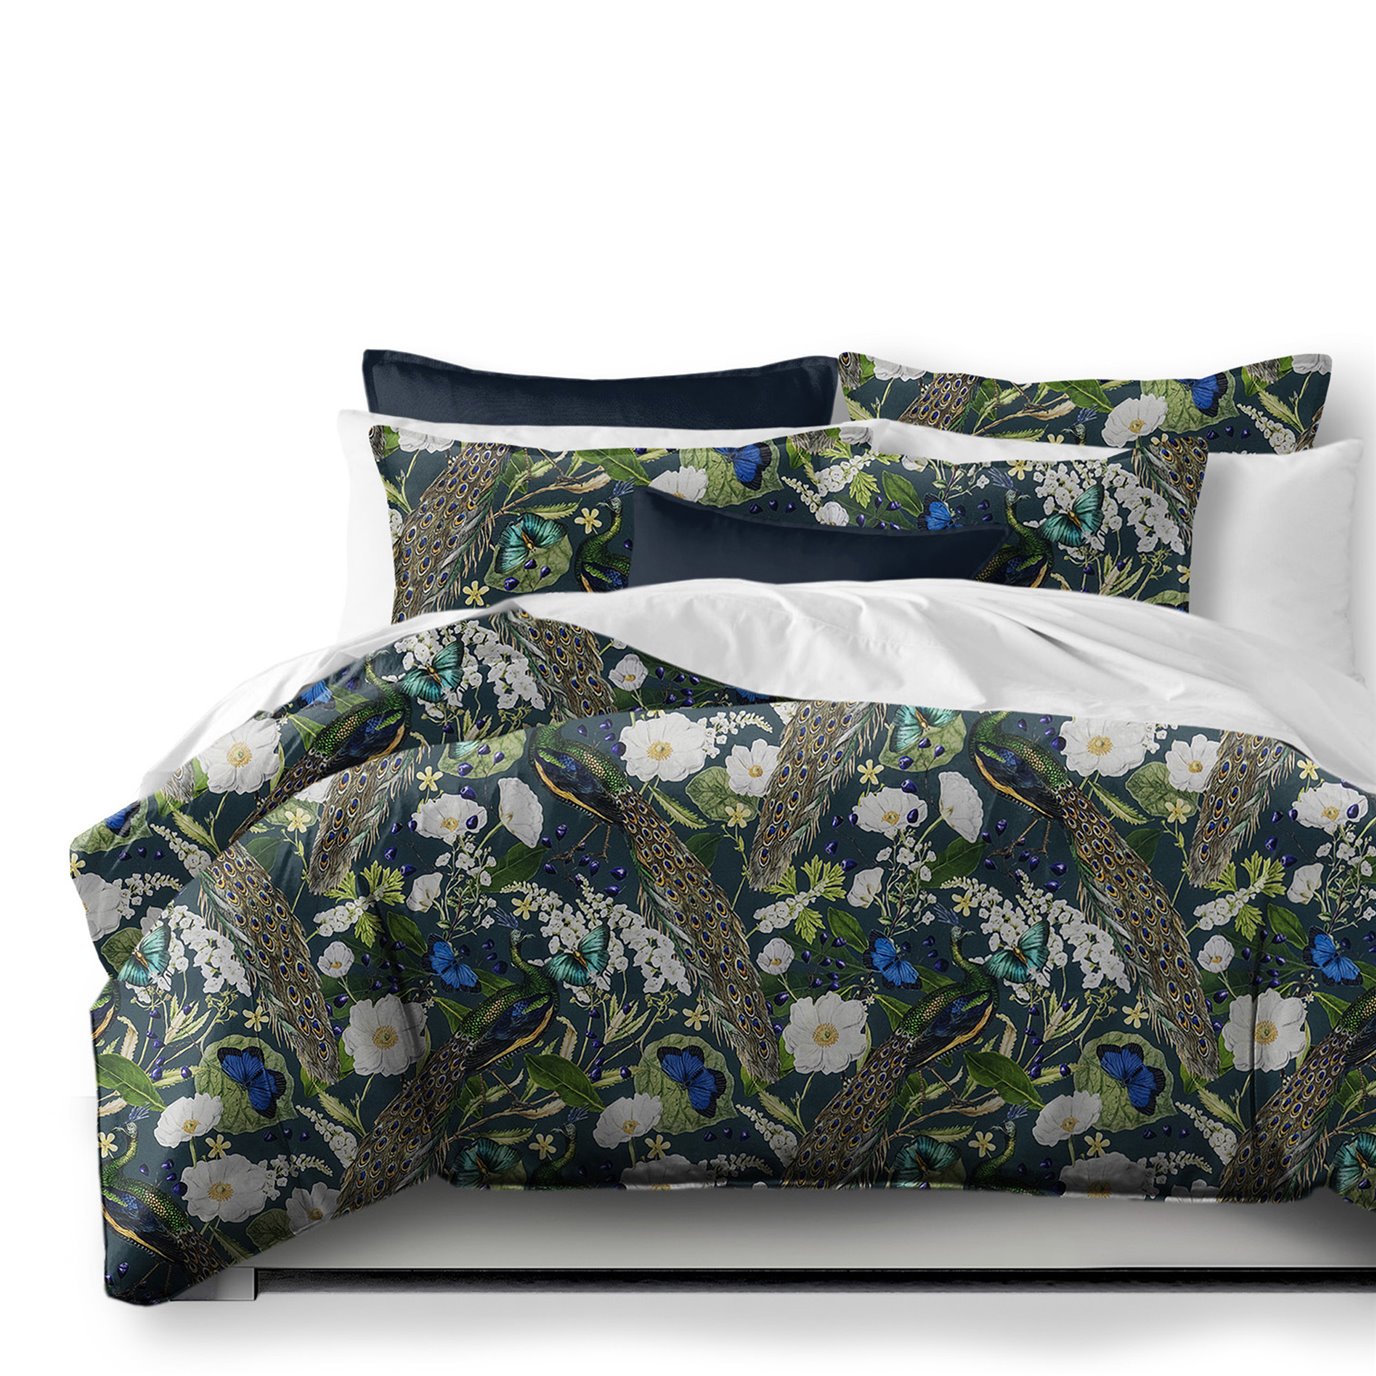 Peacock Print Teal/Navy Coverlet and Pillow Sham(s) Set - Size King / California King